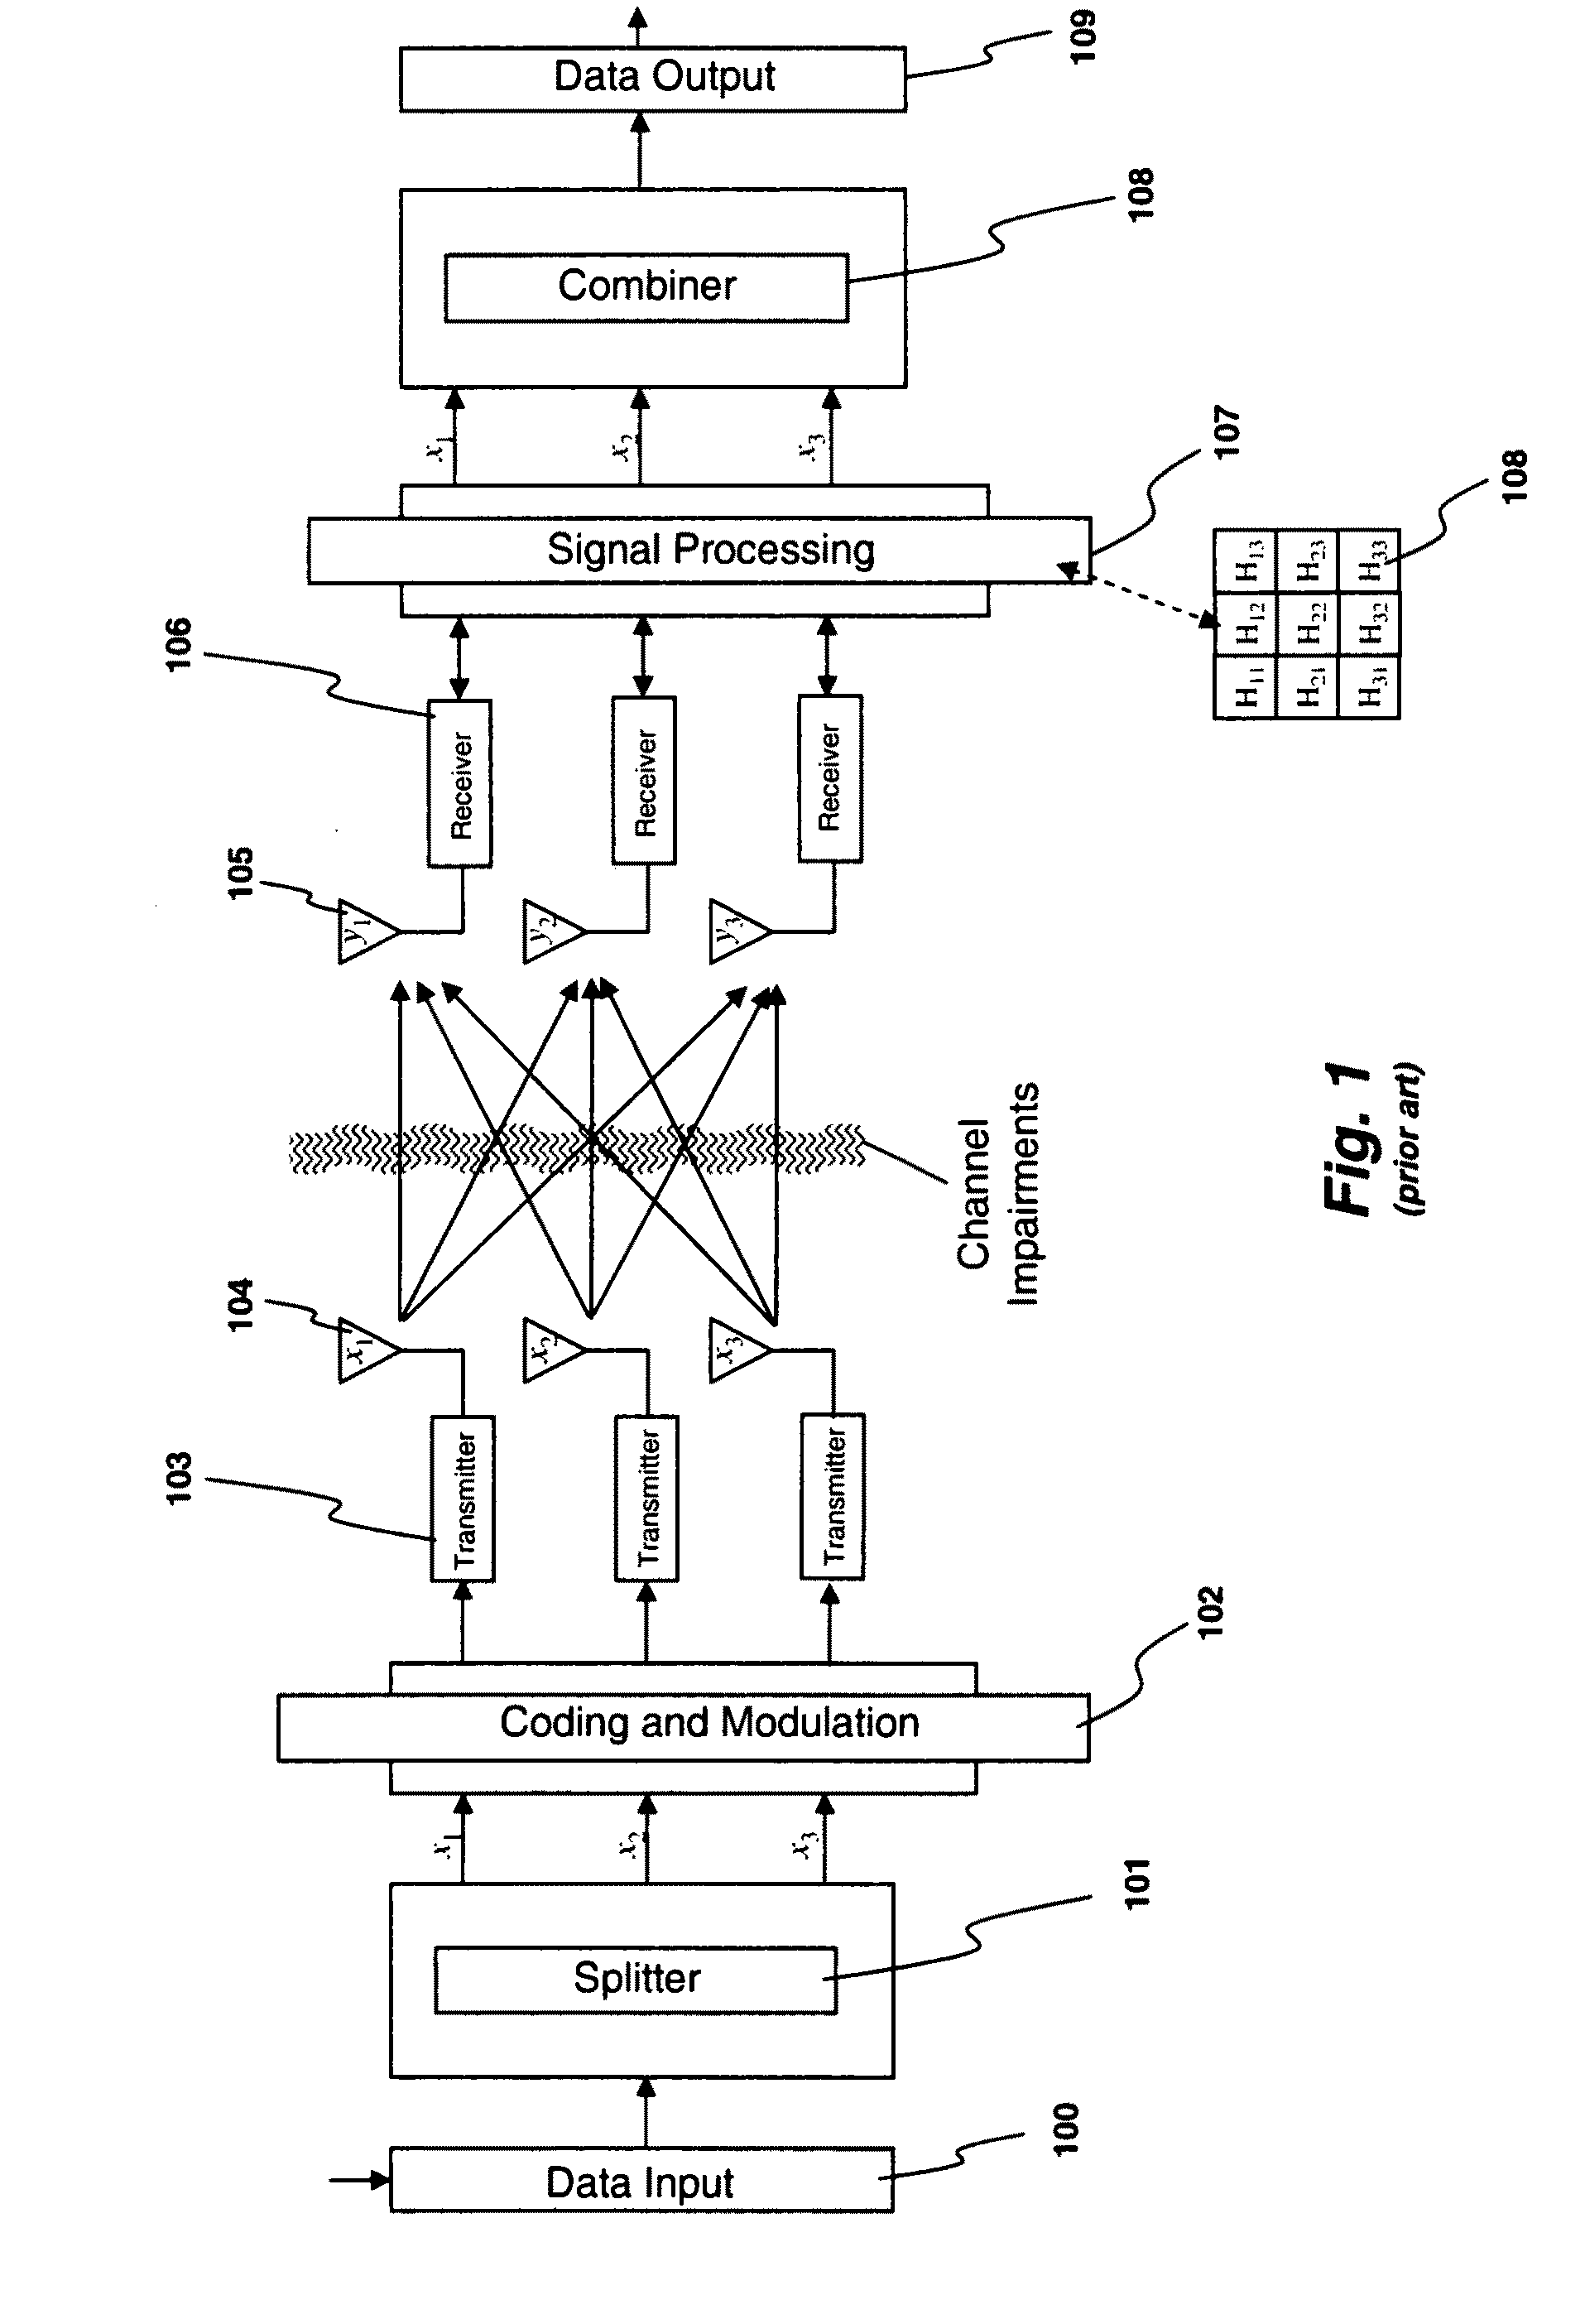 System and method for distributed input-distributed output wireless communications